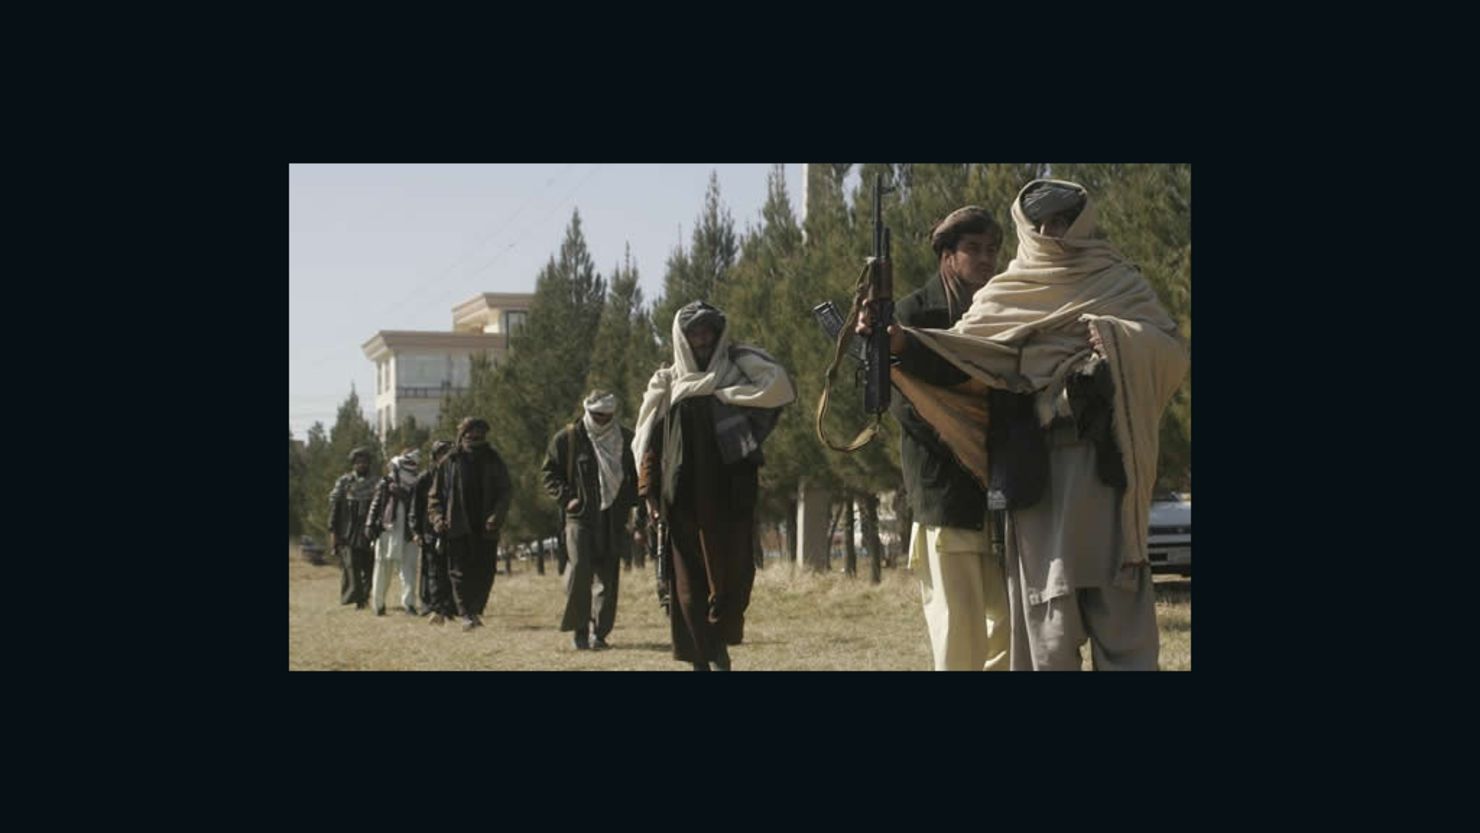 Many of the freed prisoners were old-guard Taliban, ranking members from generations past. (File photo)